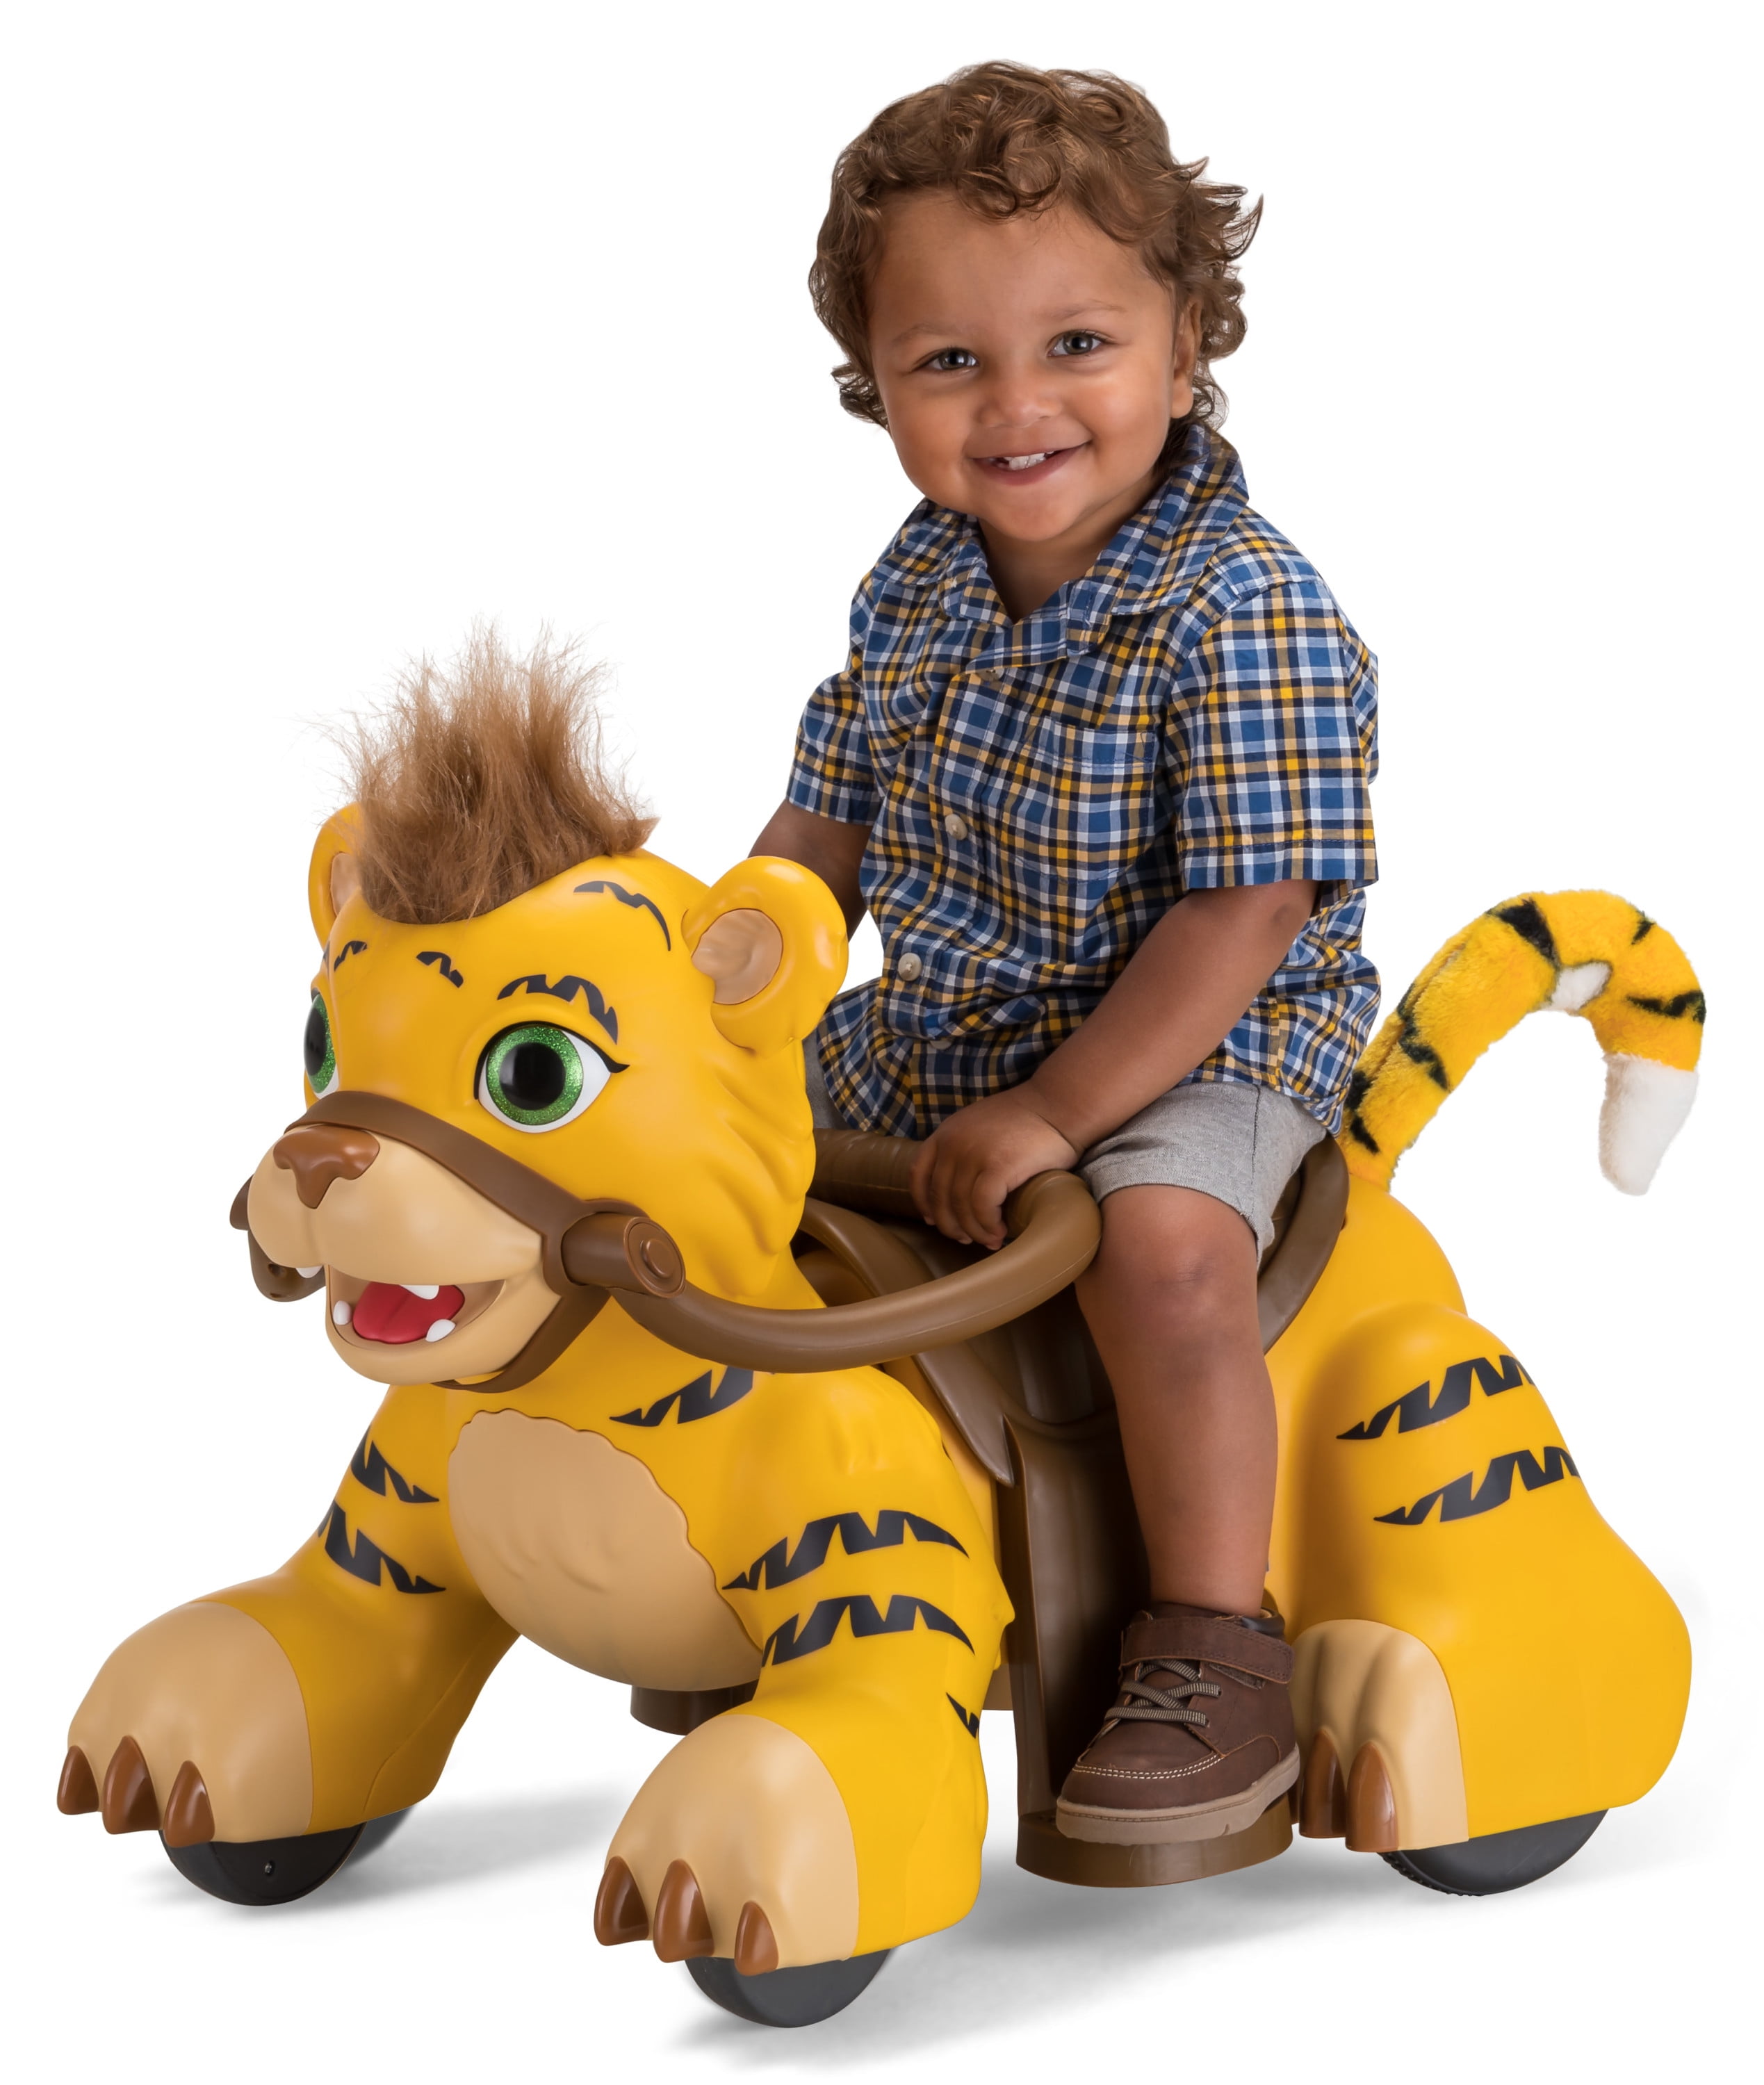 BATTERY OPERATED MOTORIZED RIDE ON TOYS FOR KIDS MINI TIGER by Giddy Up Rides 